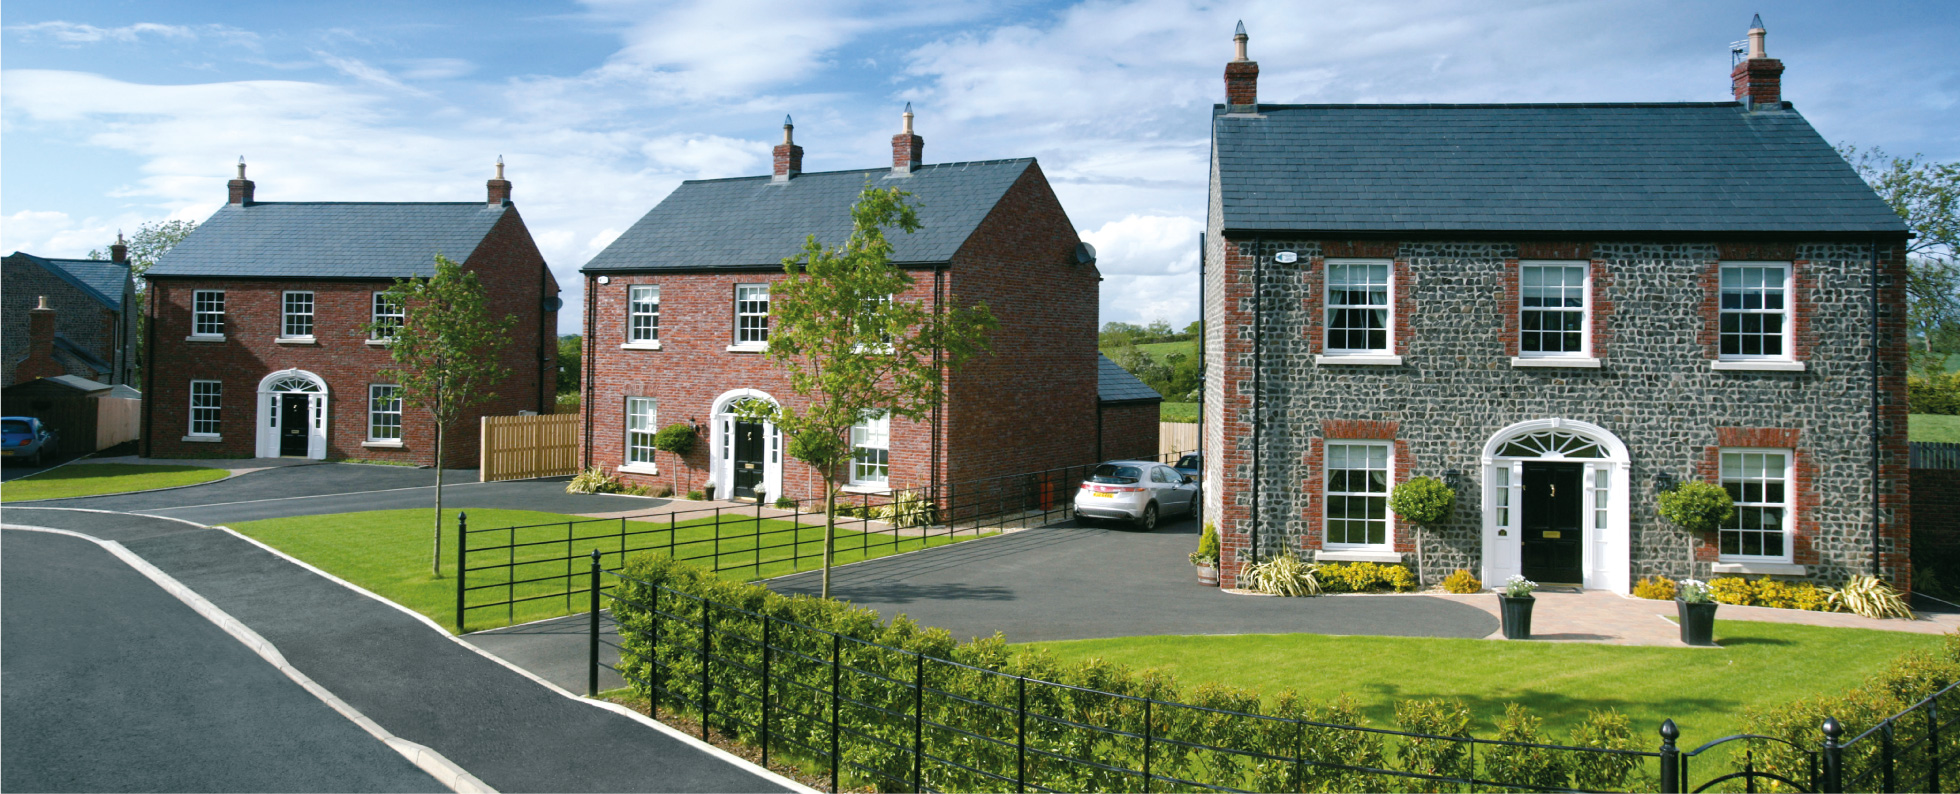 Porter & Co Homes :: New Homes Northern Ireland